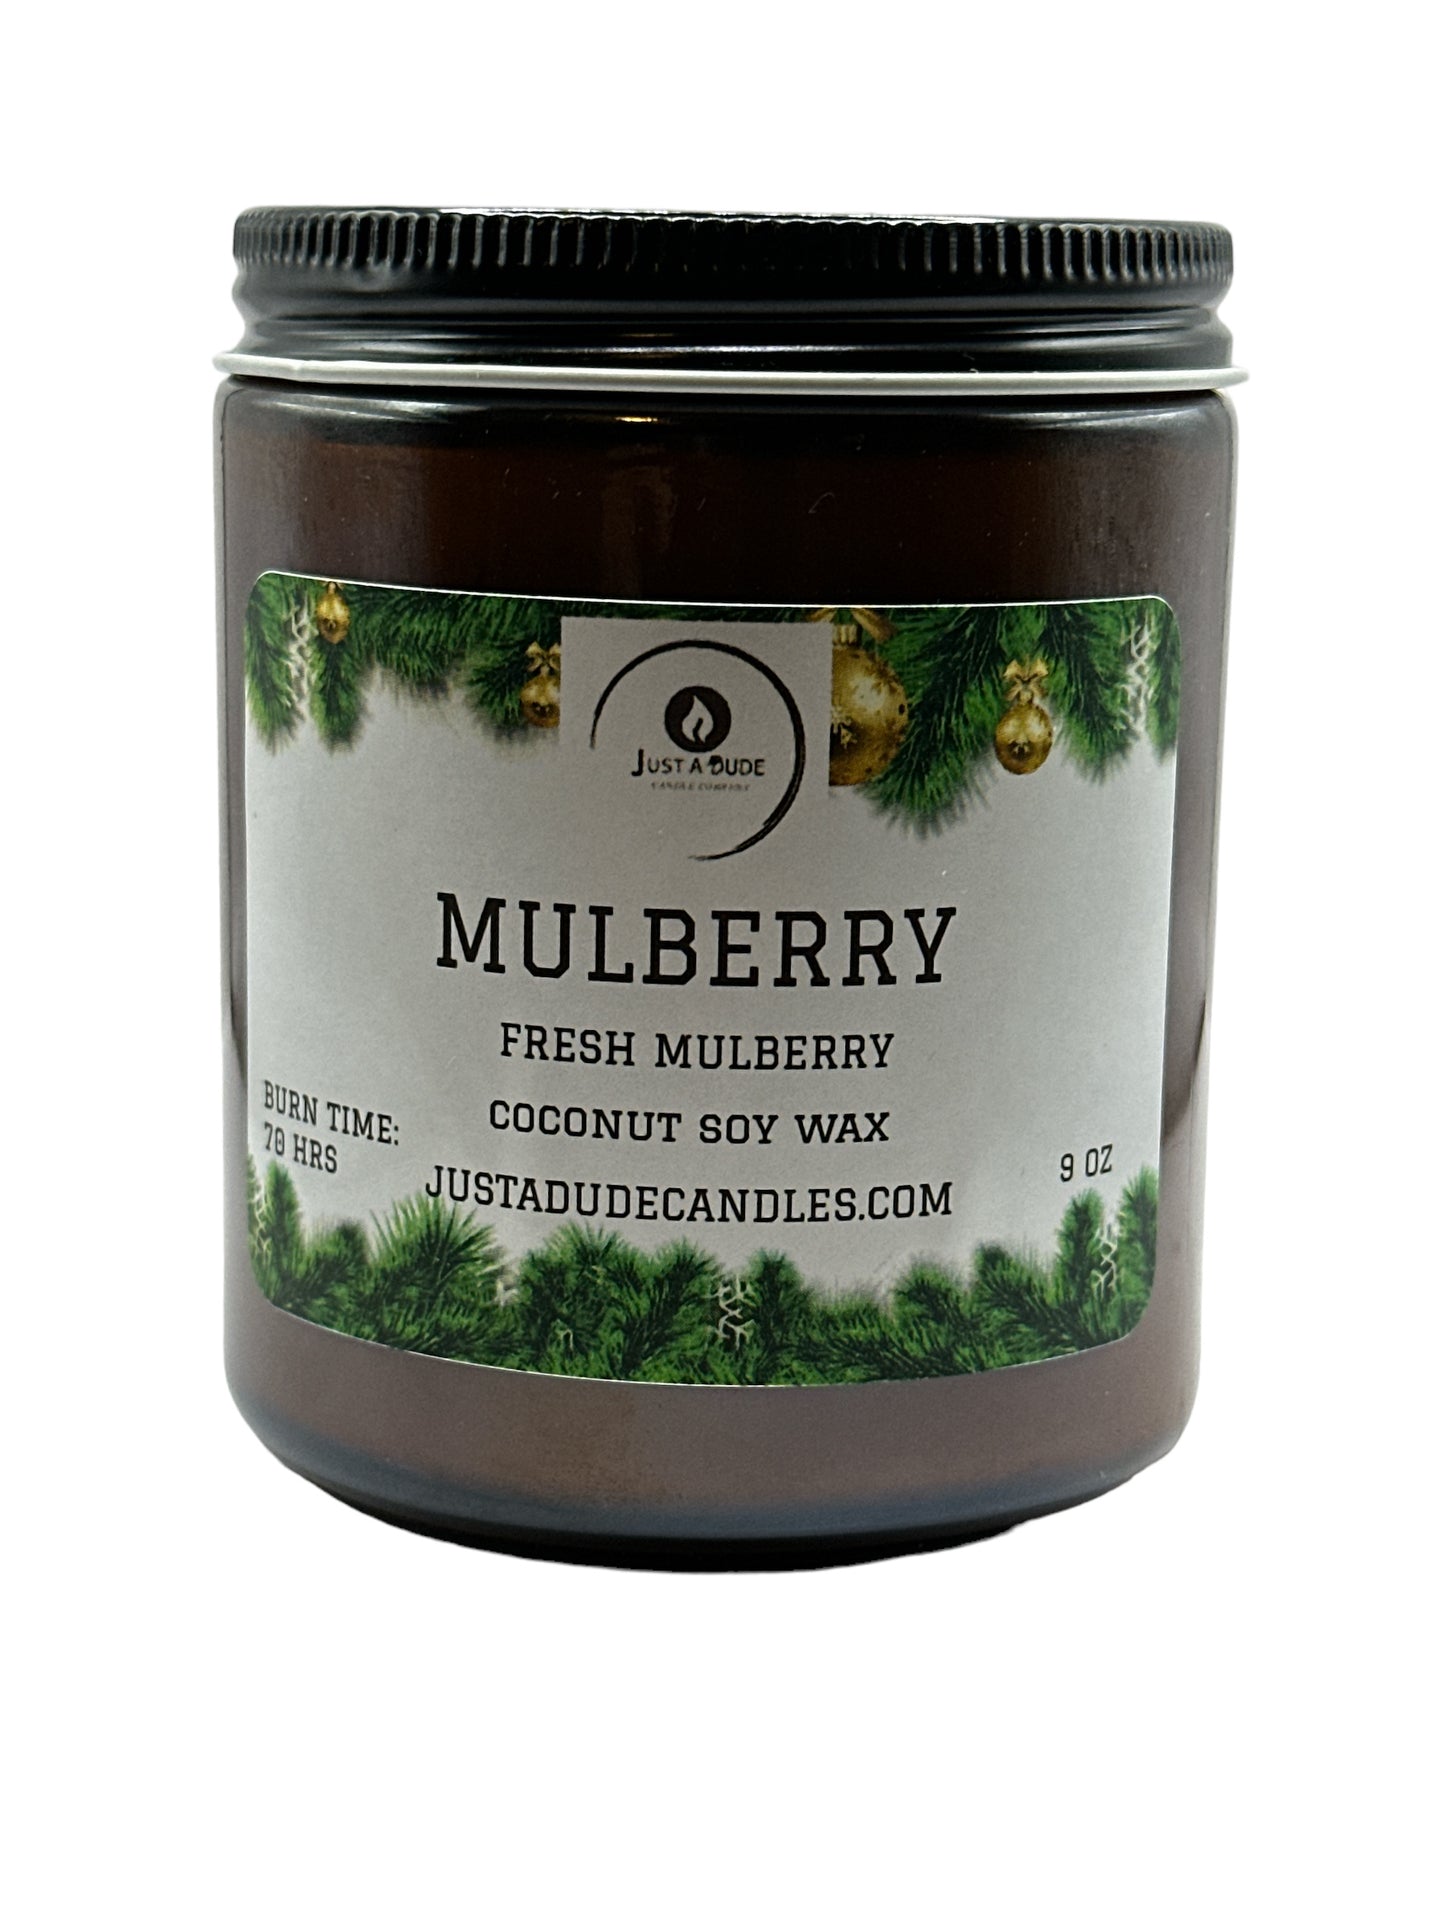 MULBERRY (FRESH MULBERRY) AMBER JAR COLLECTION